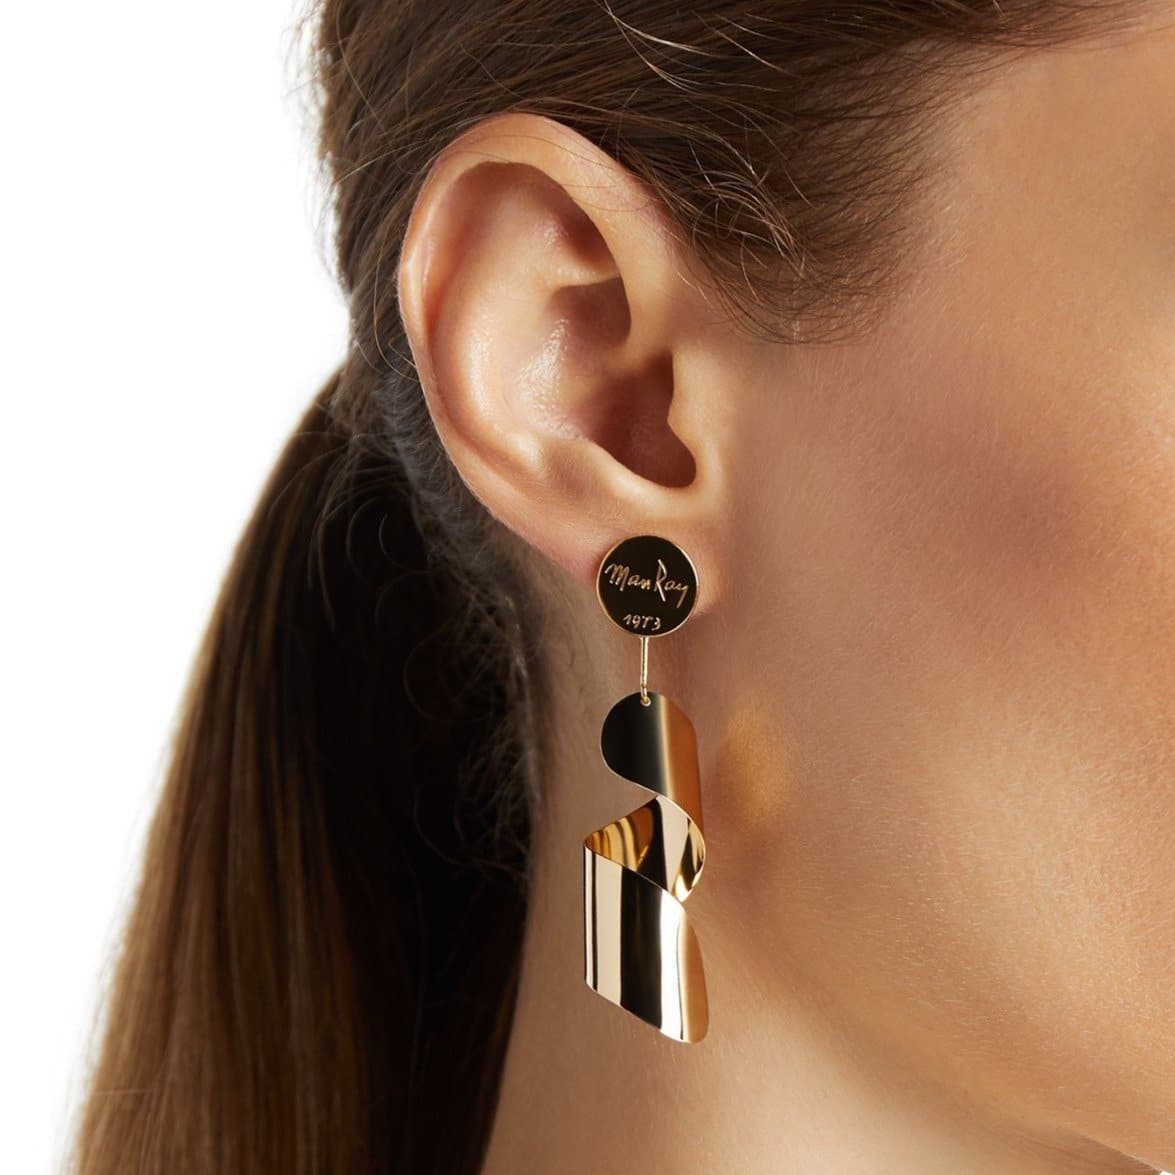 18kt Sustainable Gold Earrings for Women Made in NYC